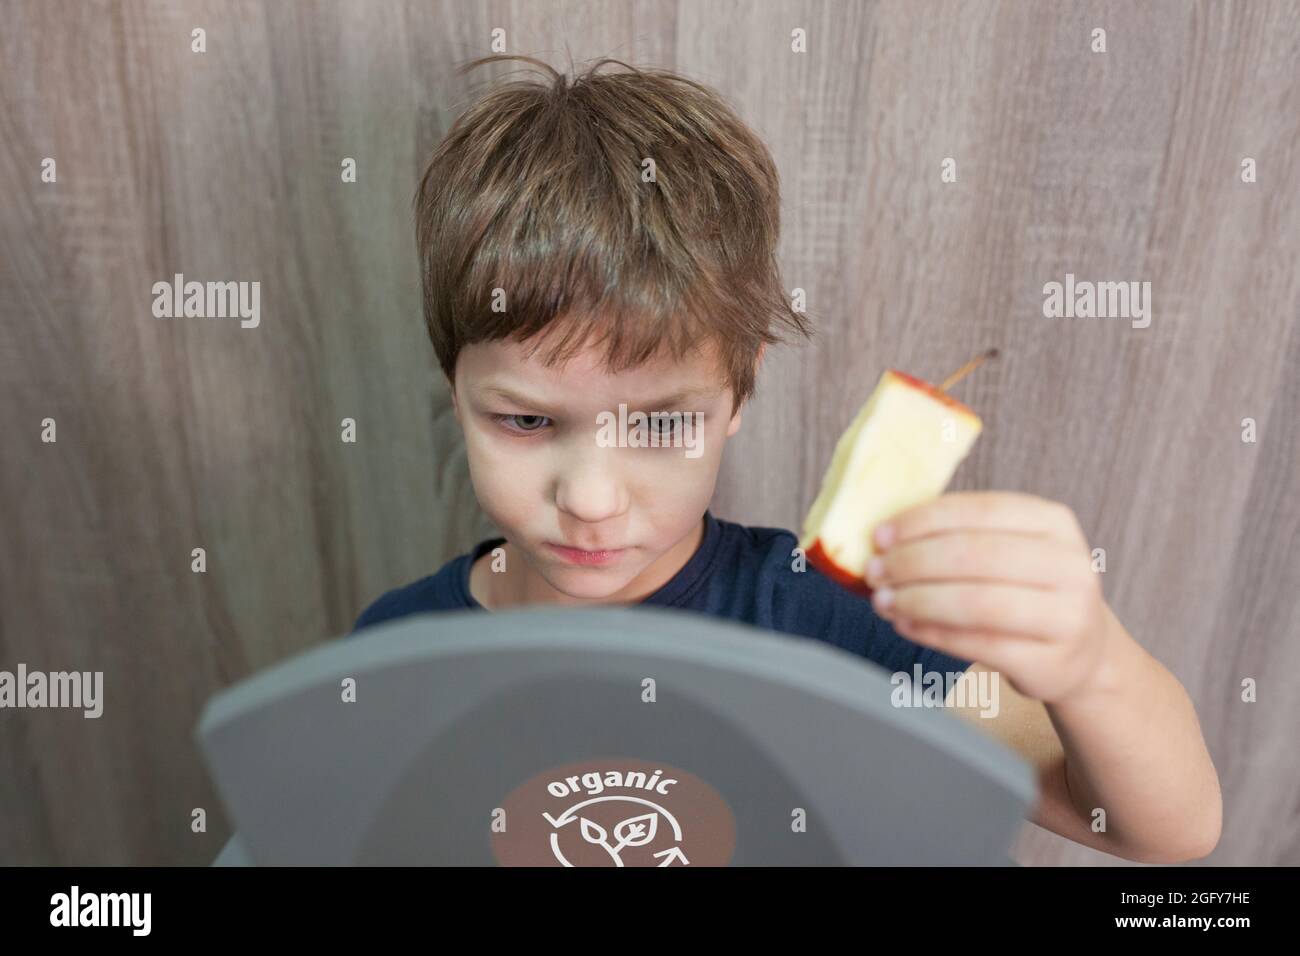 Child boy throwing apple core to waste bin for organic at home. Education about Waste Segregation concept Stock Photo